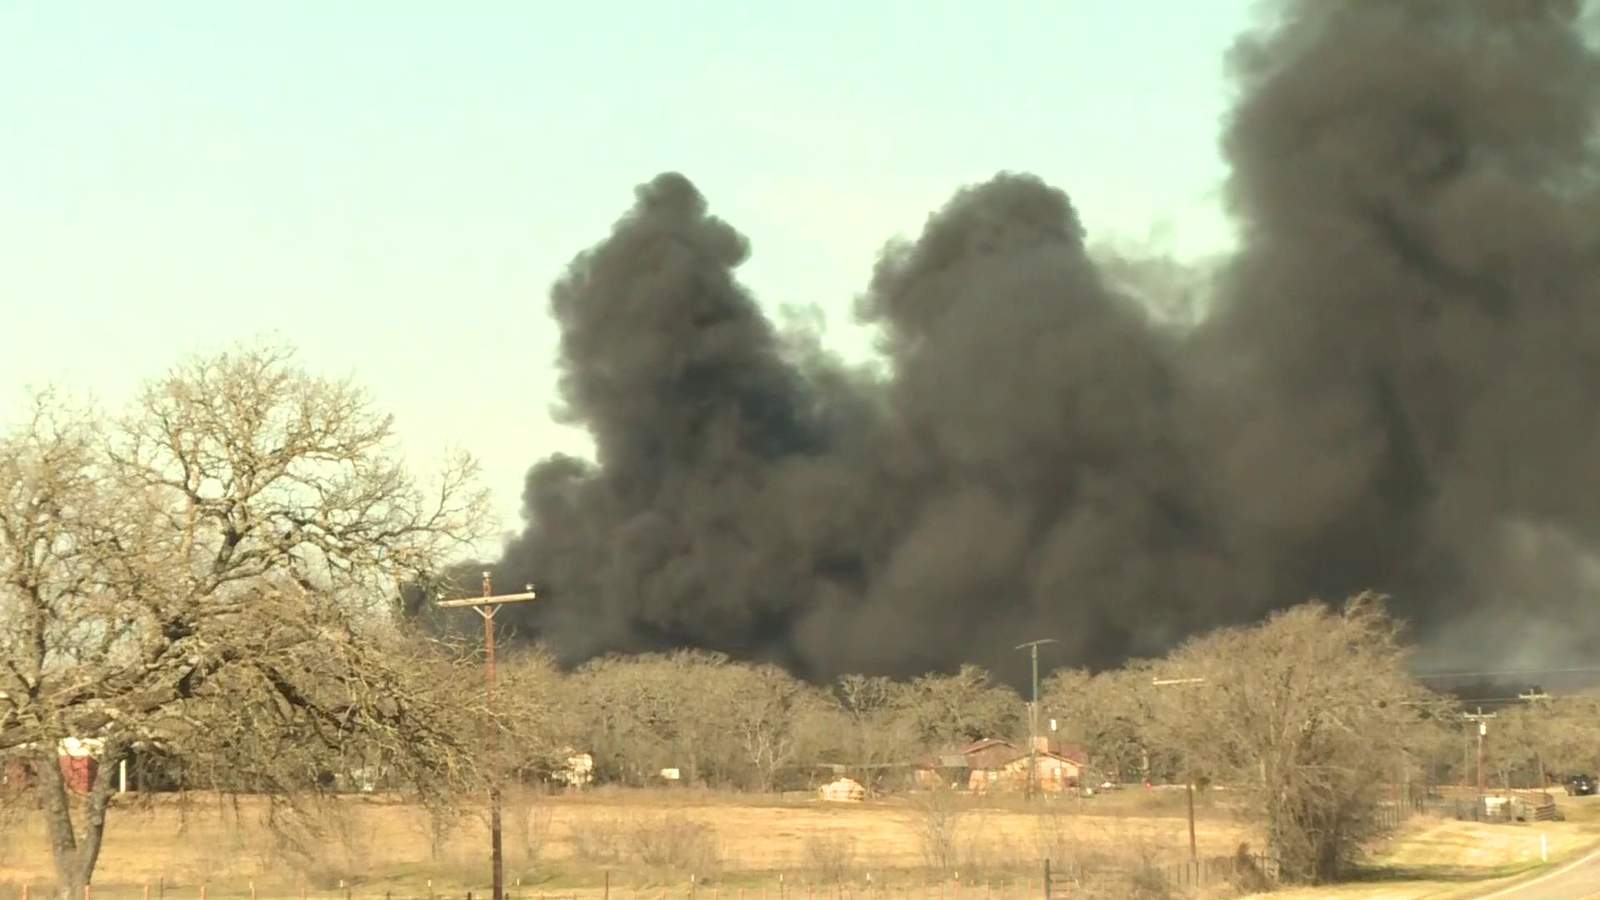 Train, 18-wheeler collide in Central Texas, causing explosion and large fire